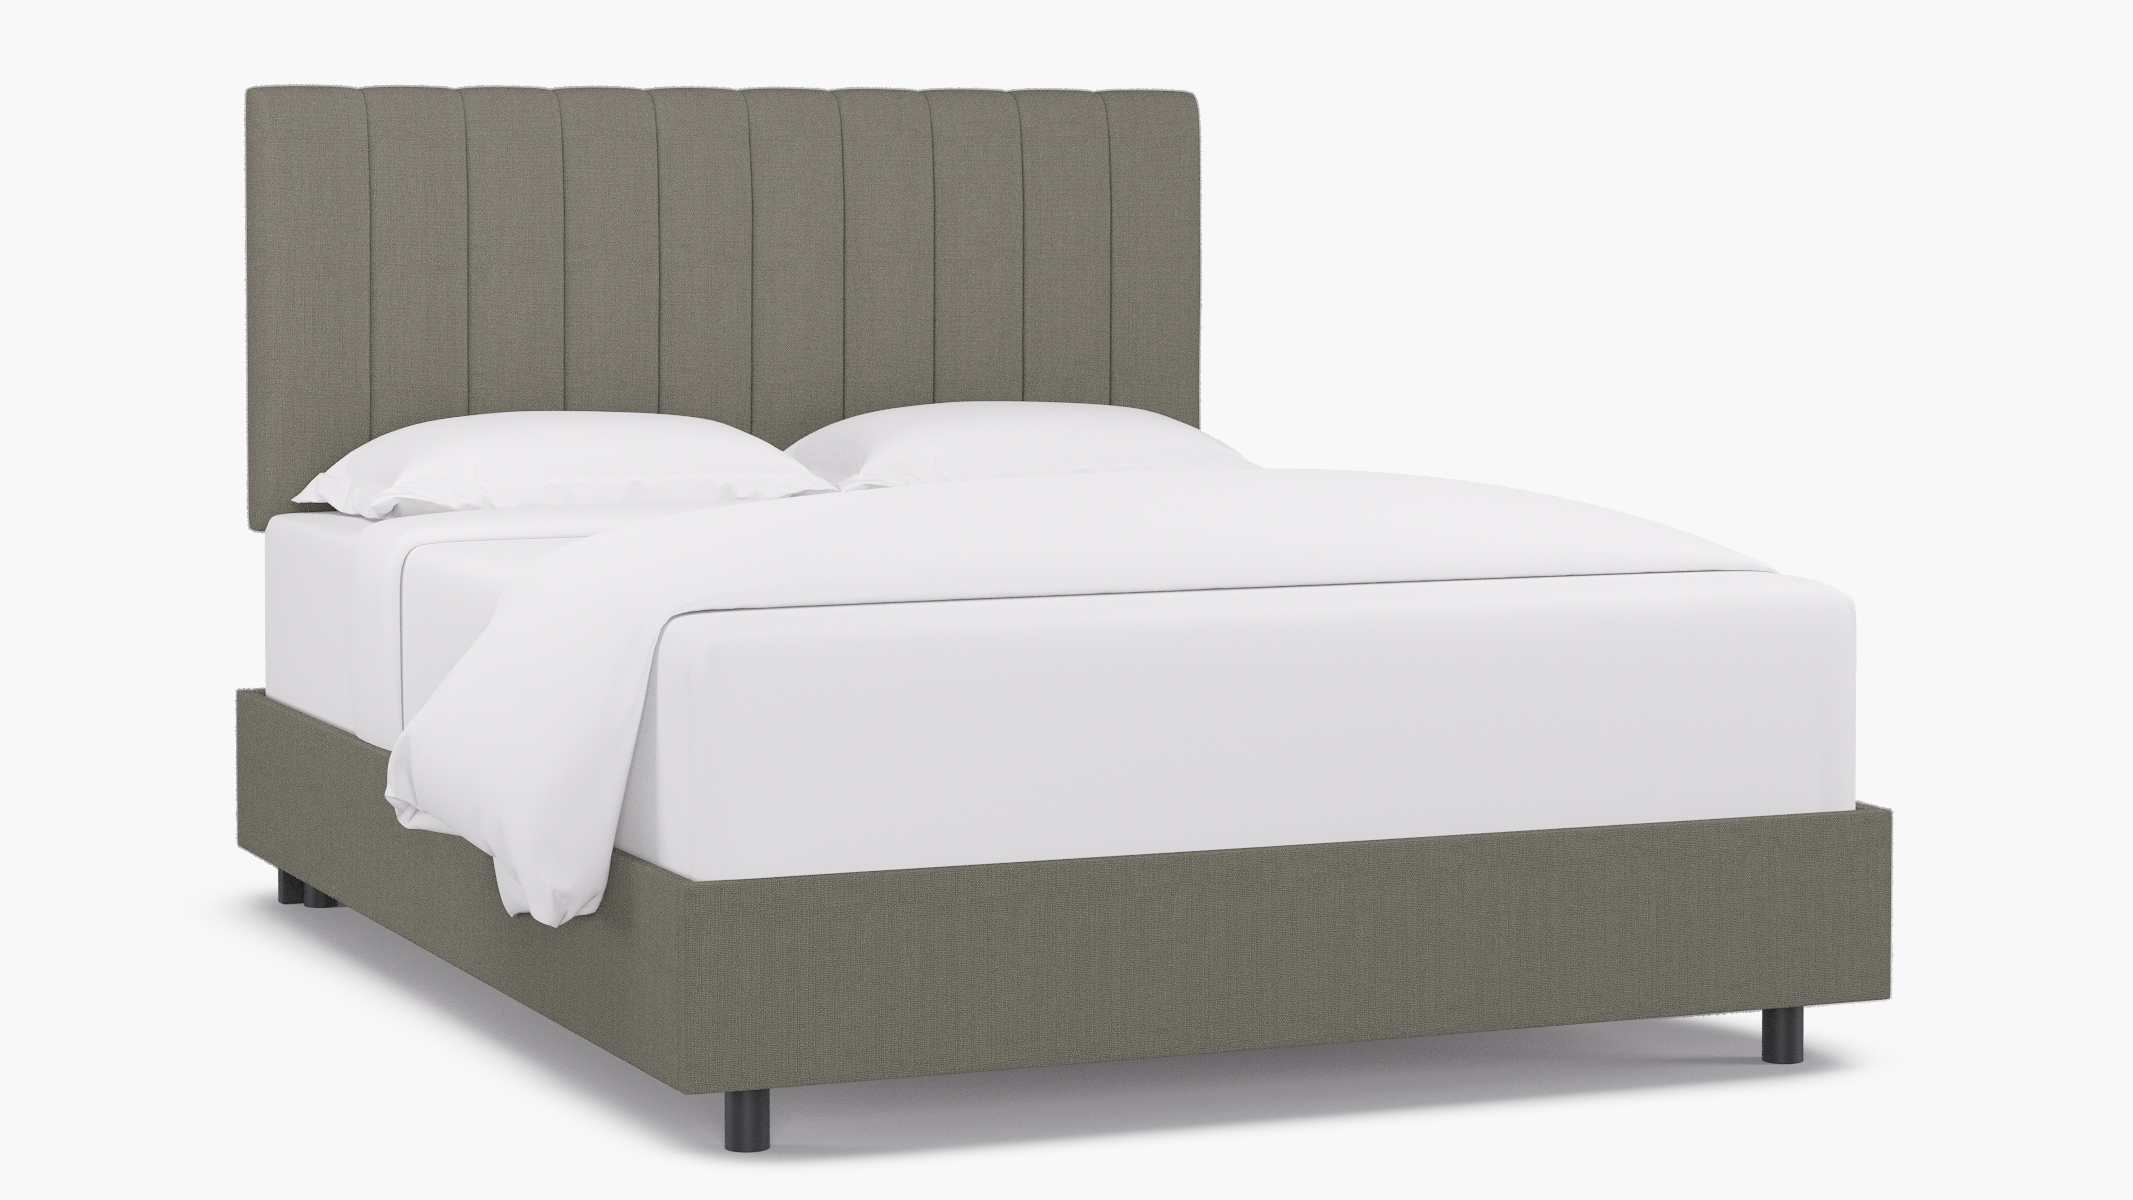 Channel Tufted Bed, Putty Everyday Linen, Queen - Image 1